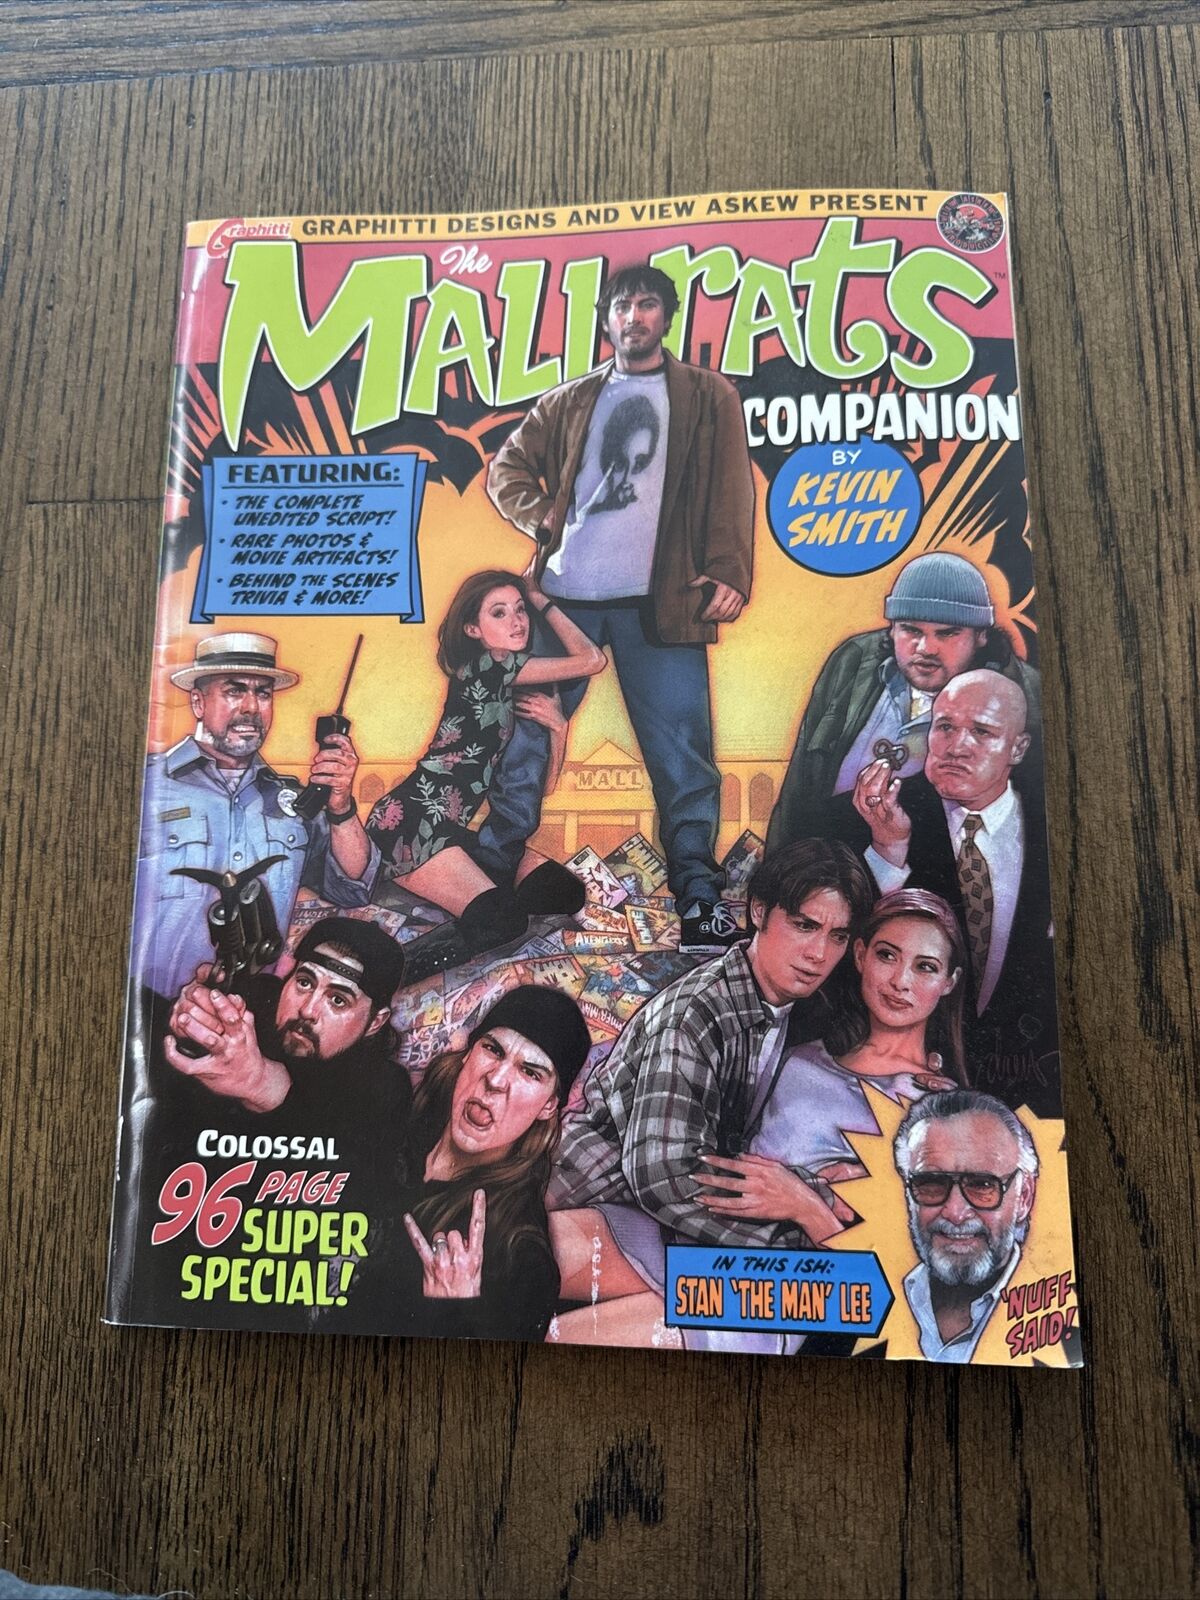 Mallrats Companion Kevin Smith Jason Mewes Clerks View Askew Book - Used